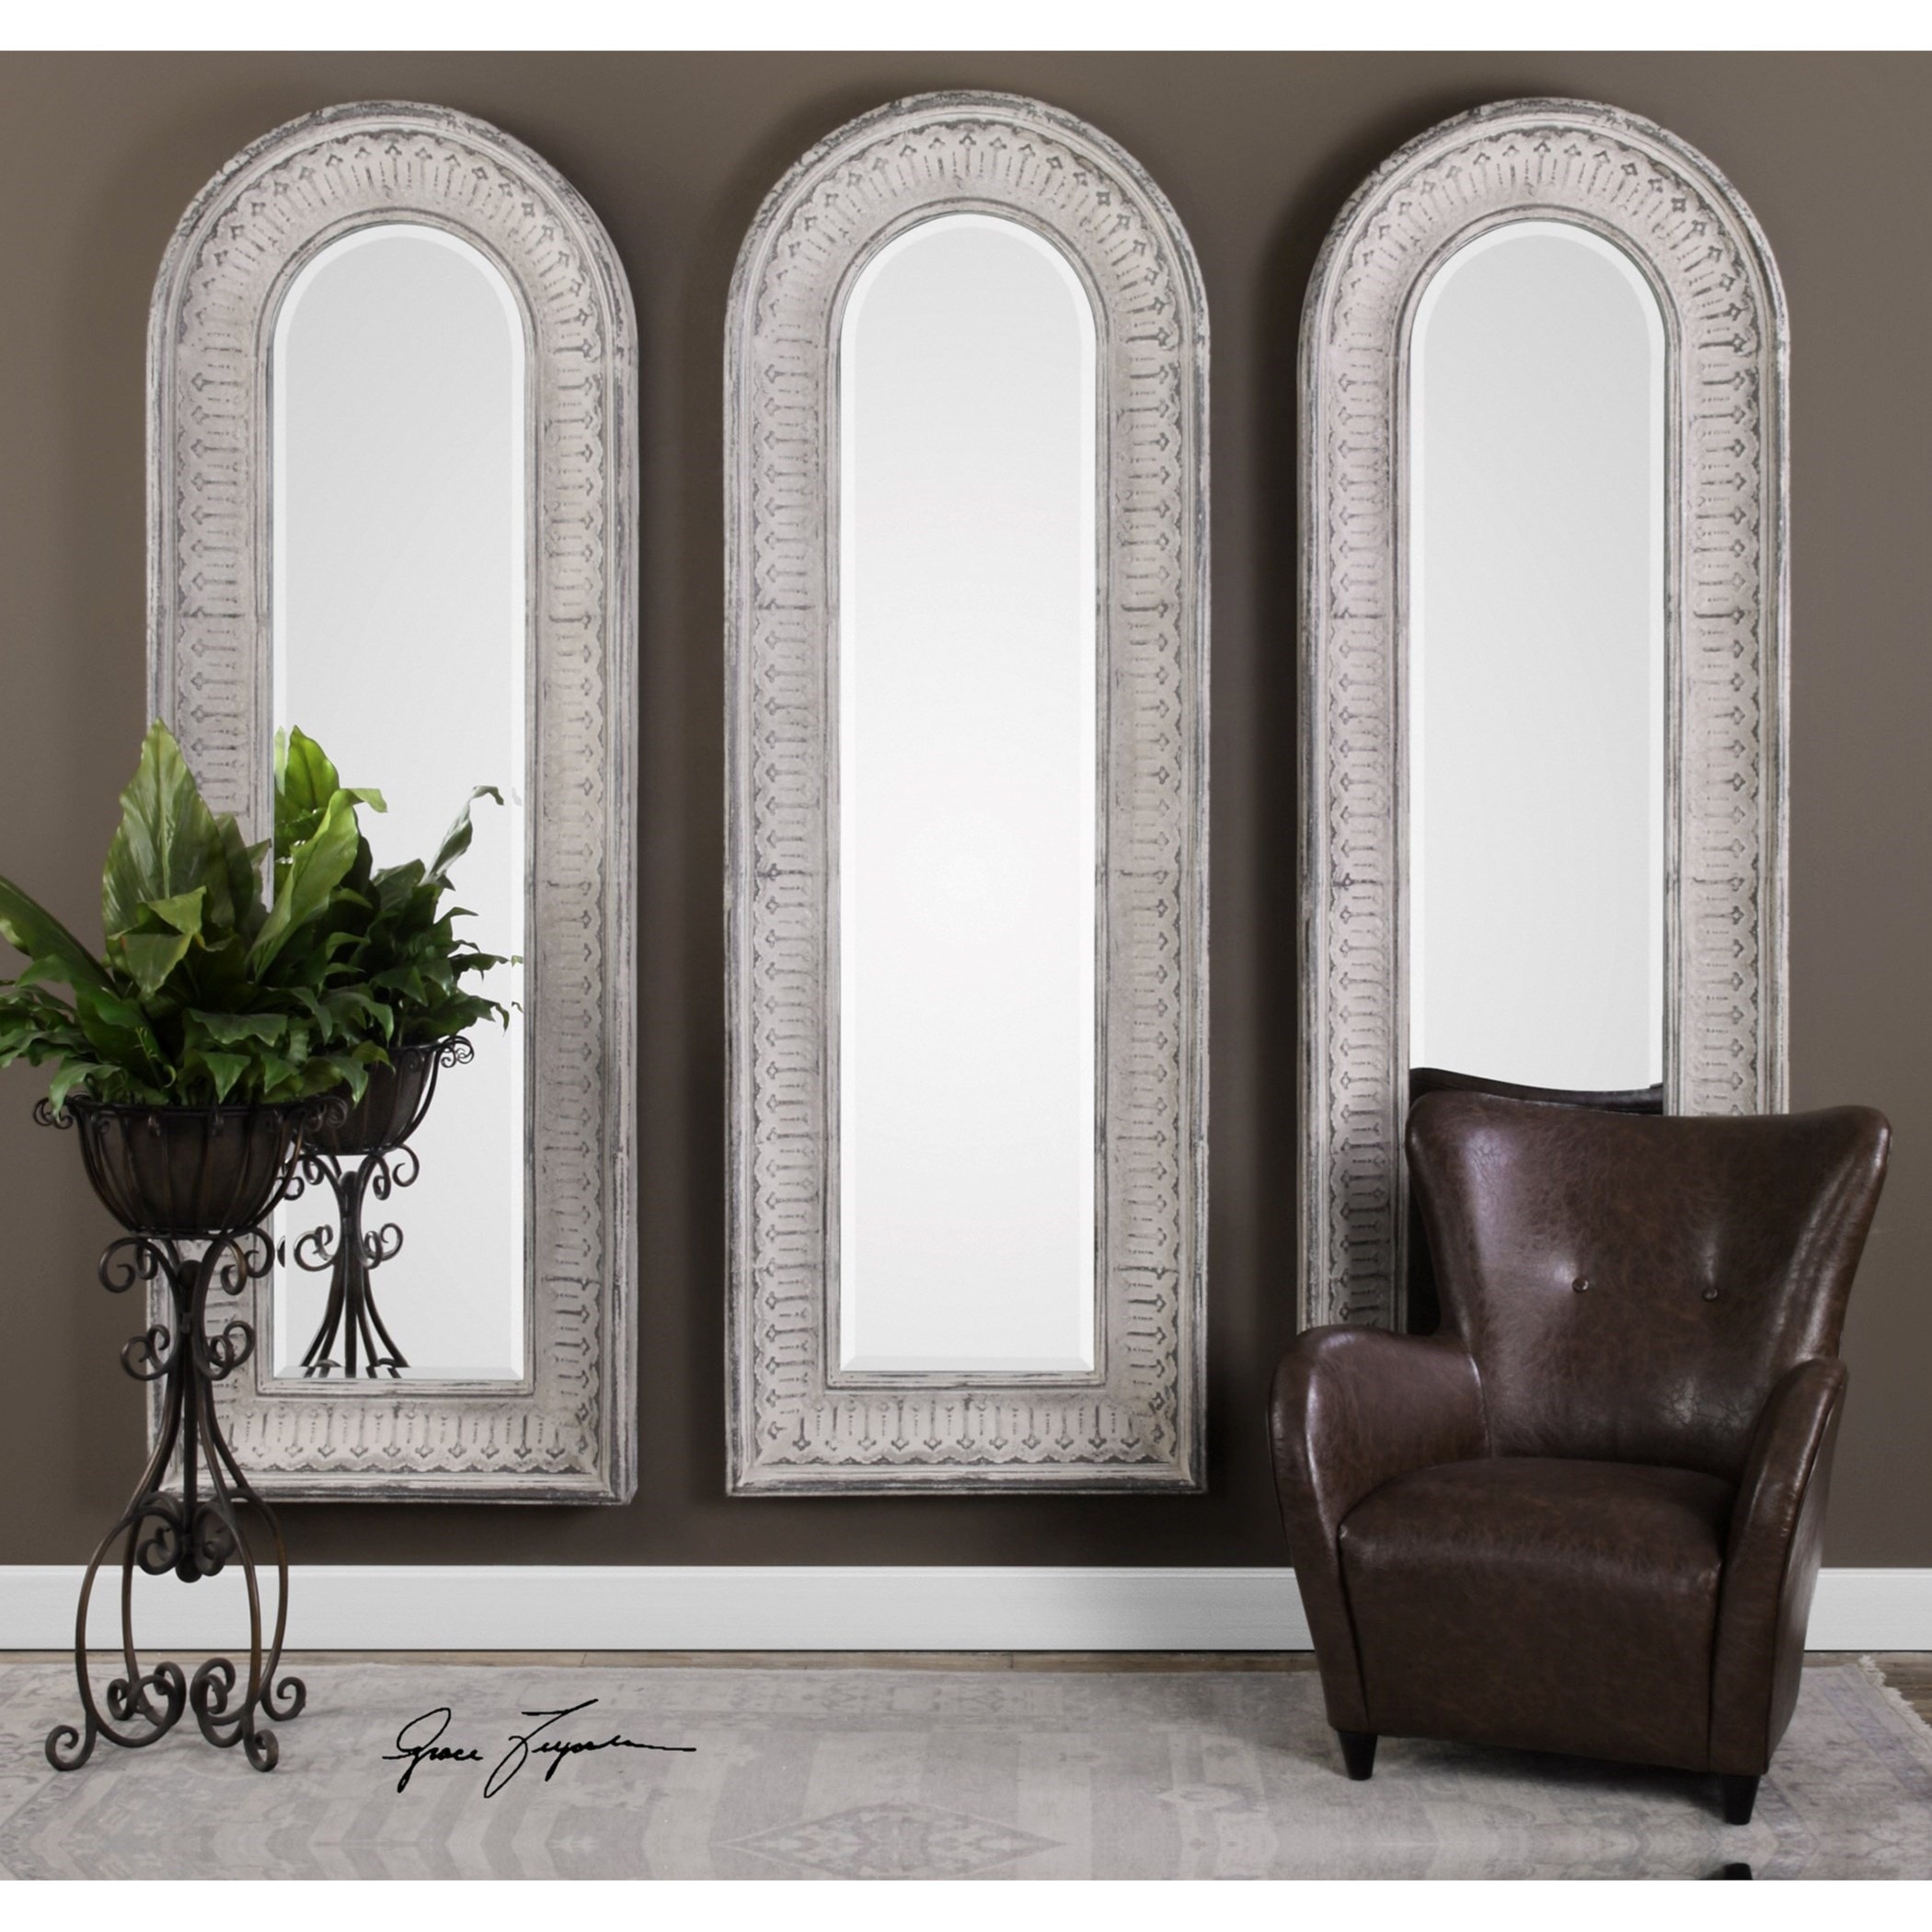 Uttermost Arched Mirrors Argenton Adcock Furniture Mirrors Wall